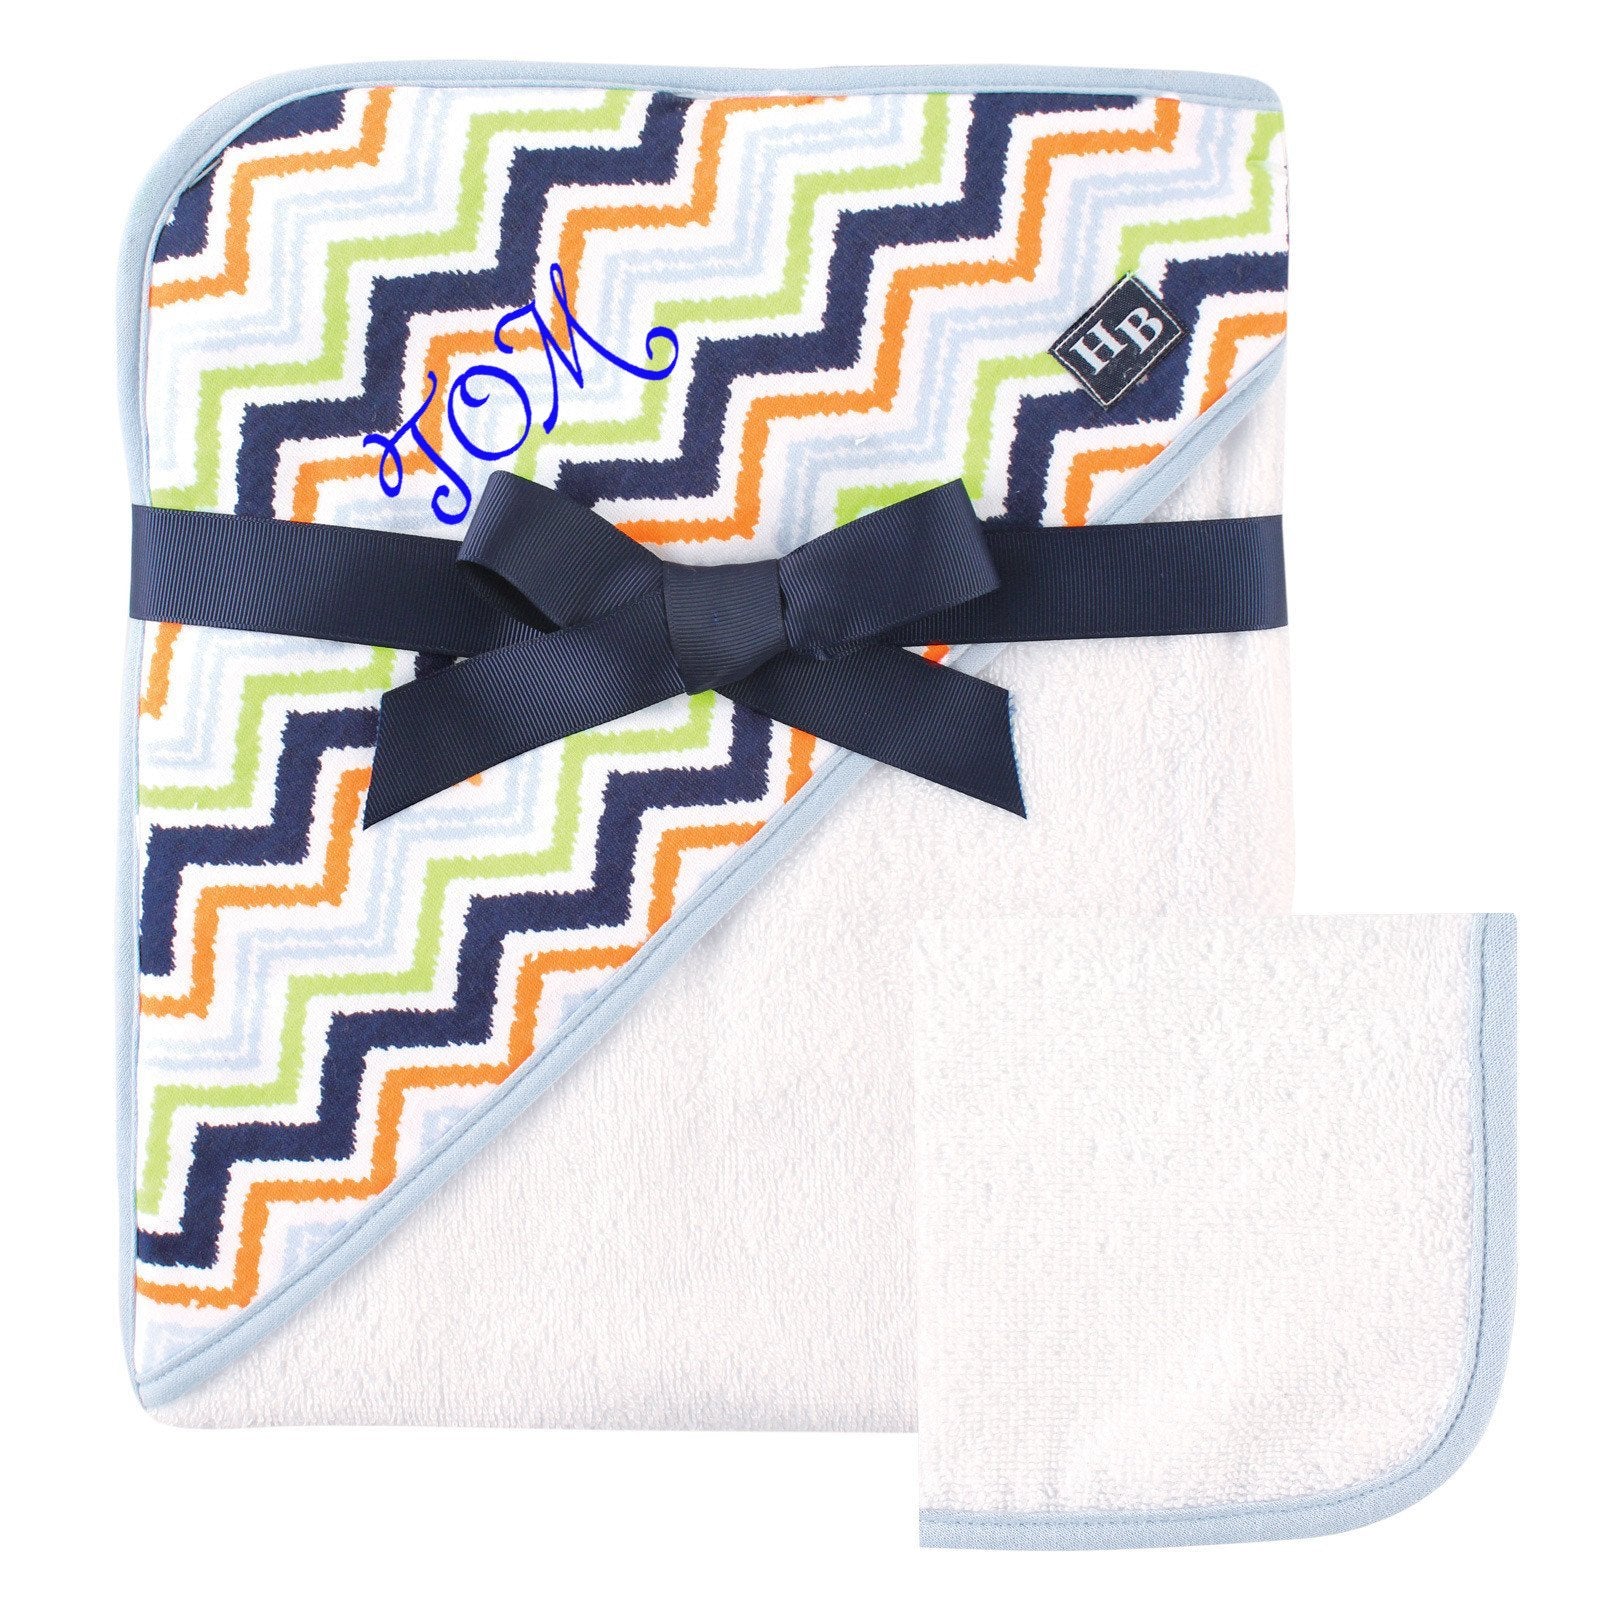 Personalized Hooded Baby Towel and Washcloth Set- CHEVRON